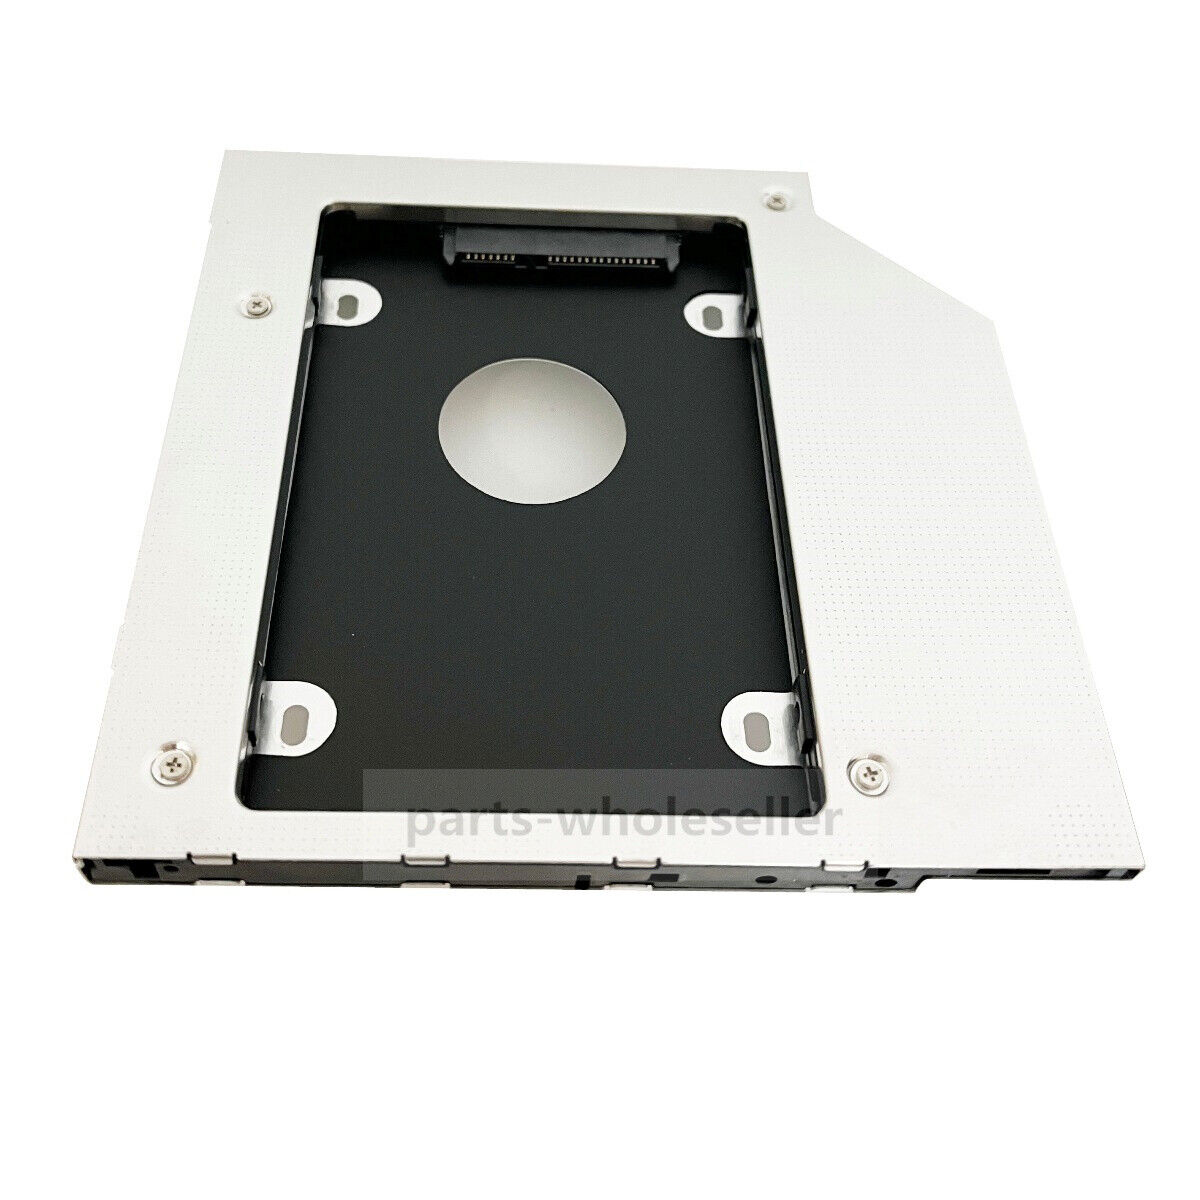 9.5mm SATA 2nd HDD SSD Case Hard Drive Caddy for Universal Laptop CD DVD-ROM ODD